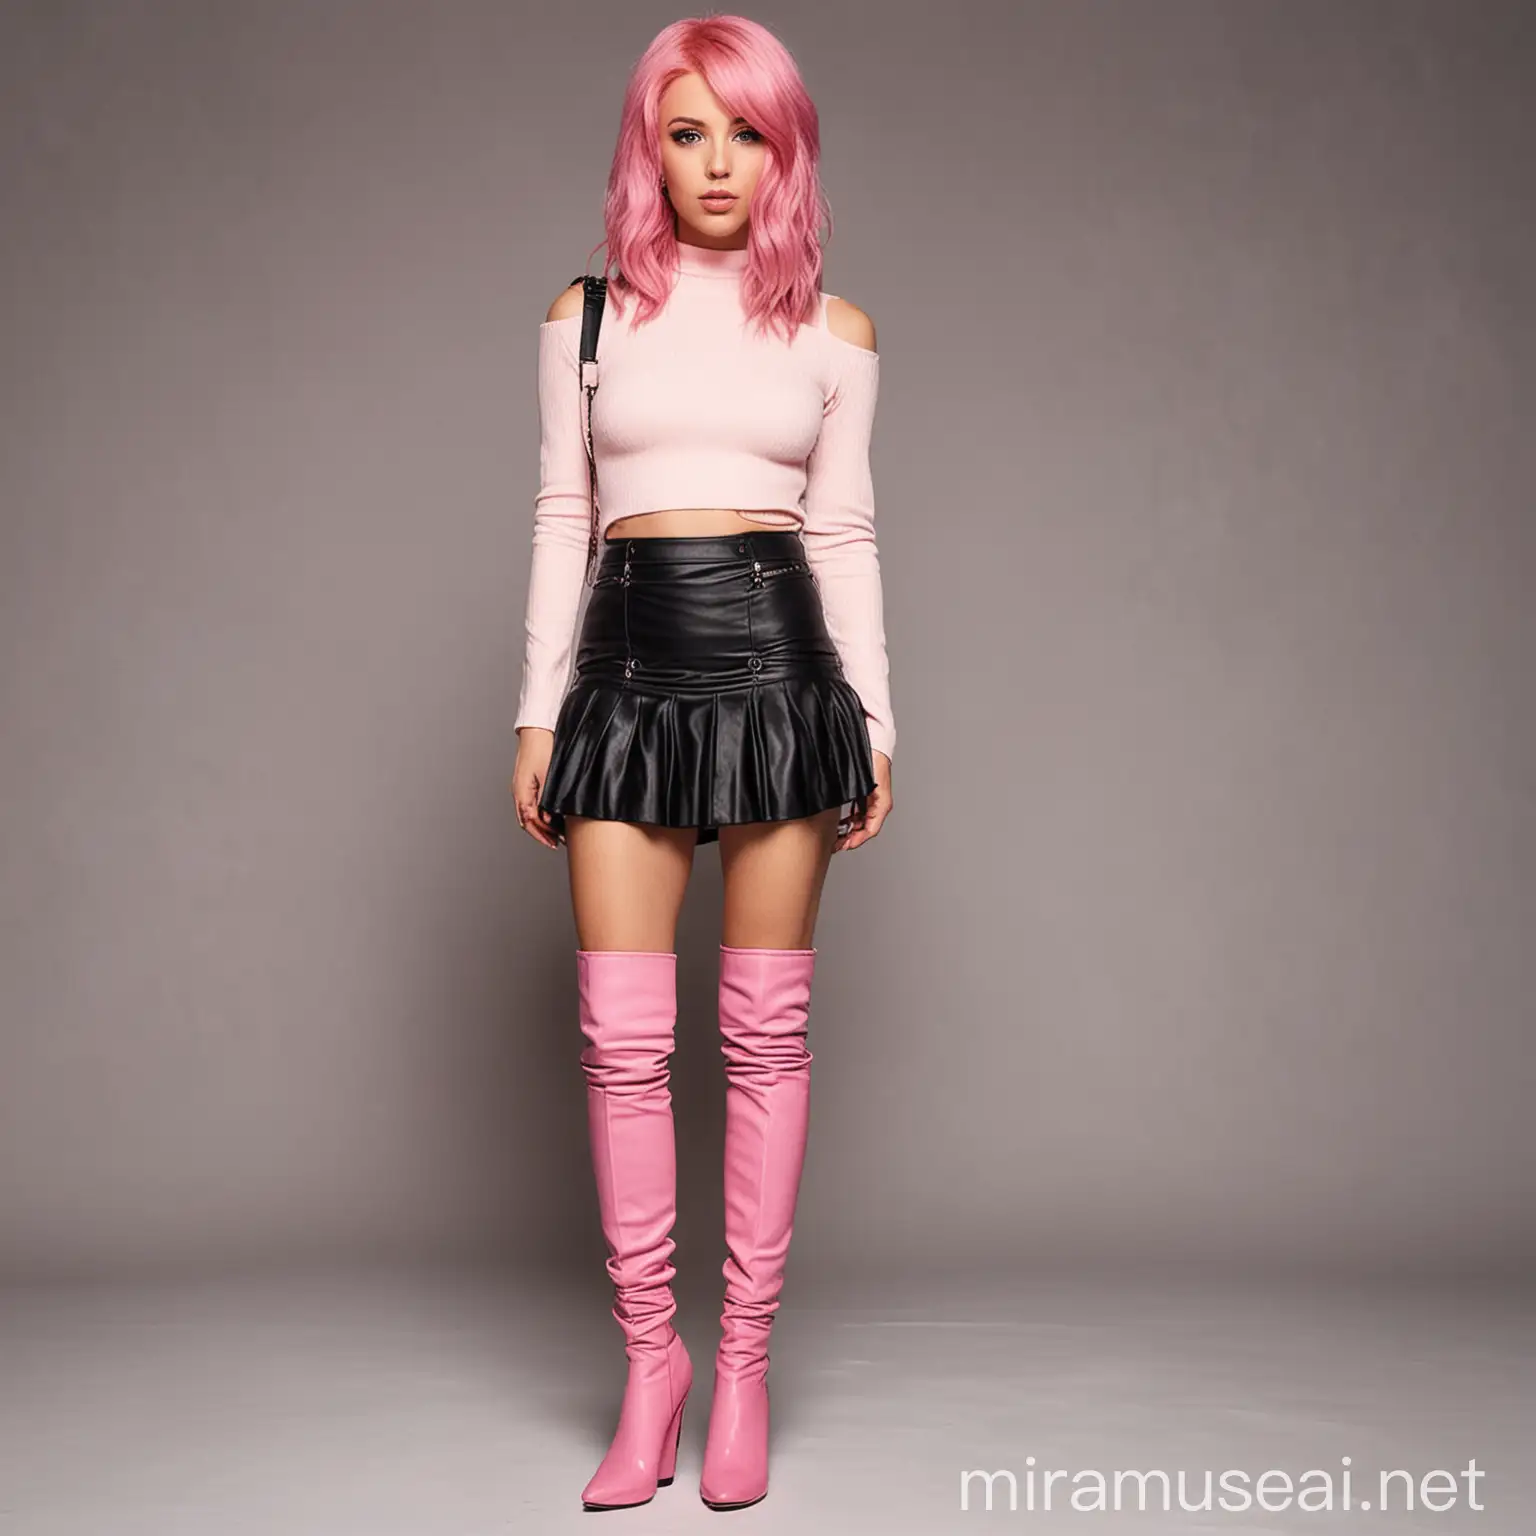 Woman with shoulder length pink hair, thigh high boots and short skirt